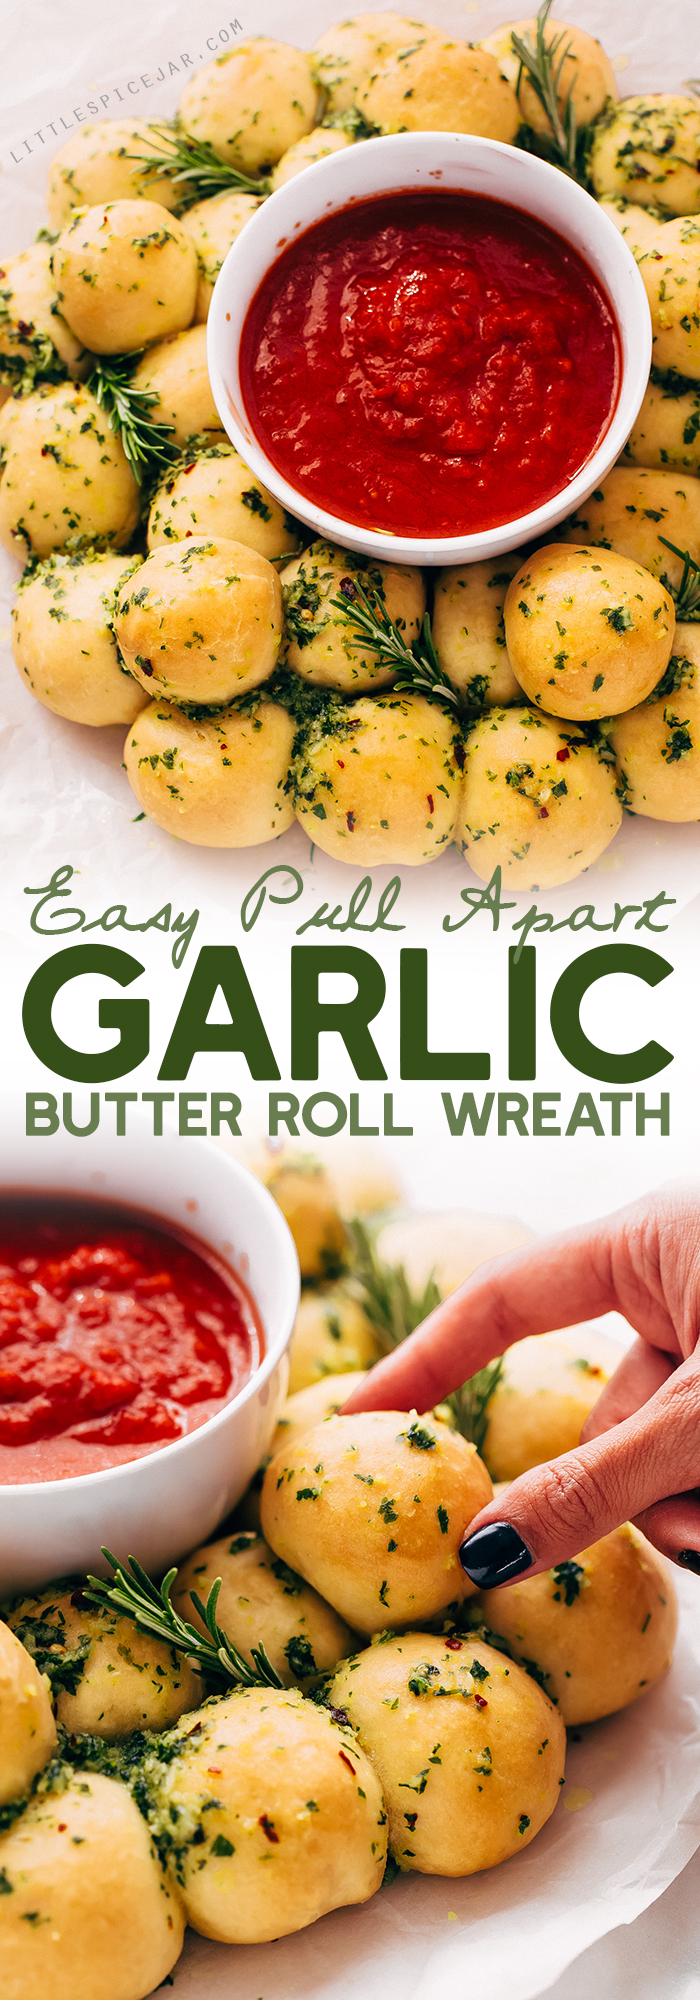 Easy Pull Apart Garlic Roll Wreath - learn how to make a wreath out of homemade garlic rolls! This recipe makes a show-stopper appetizer for all your holiday parties! #garlicrolls #garlicknots #garlicrollwreath #garlicknotwreath #holidayappetizers | Littlespicejar.com